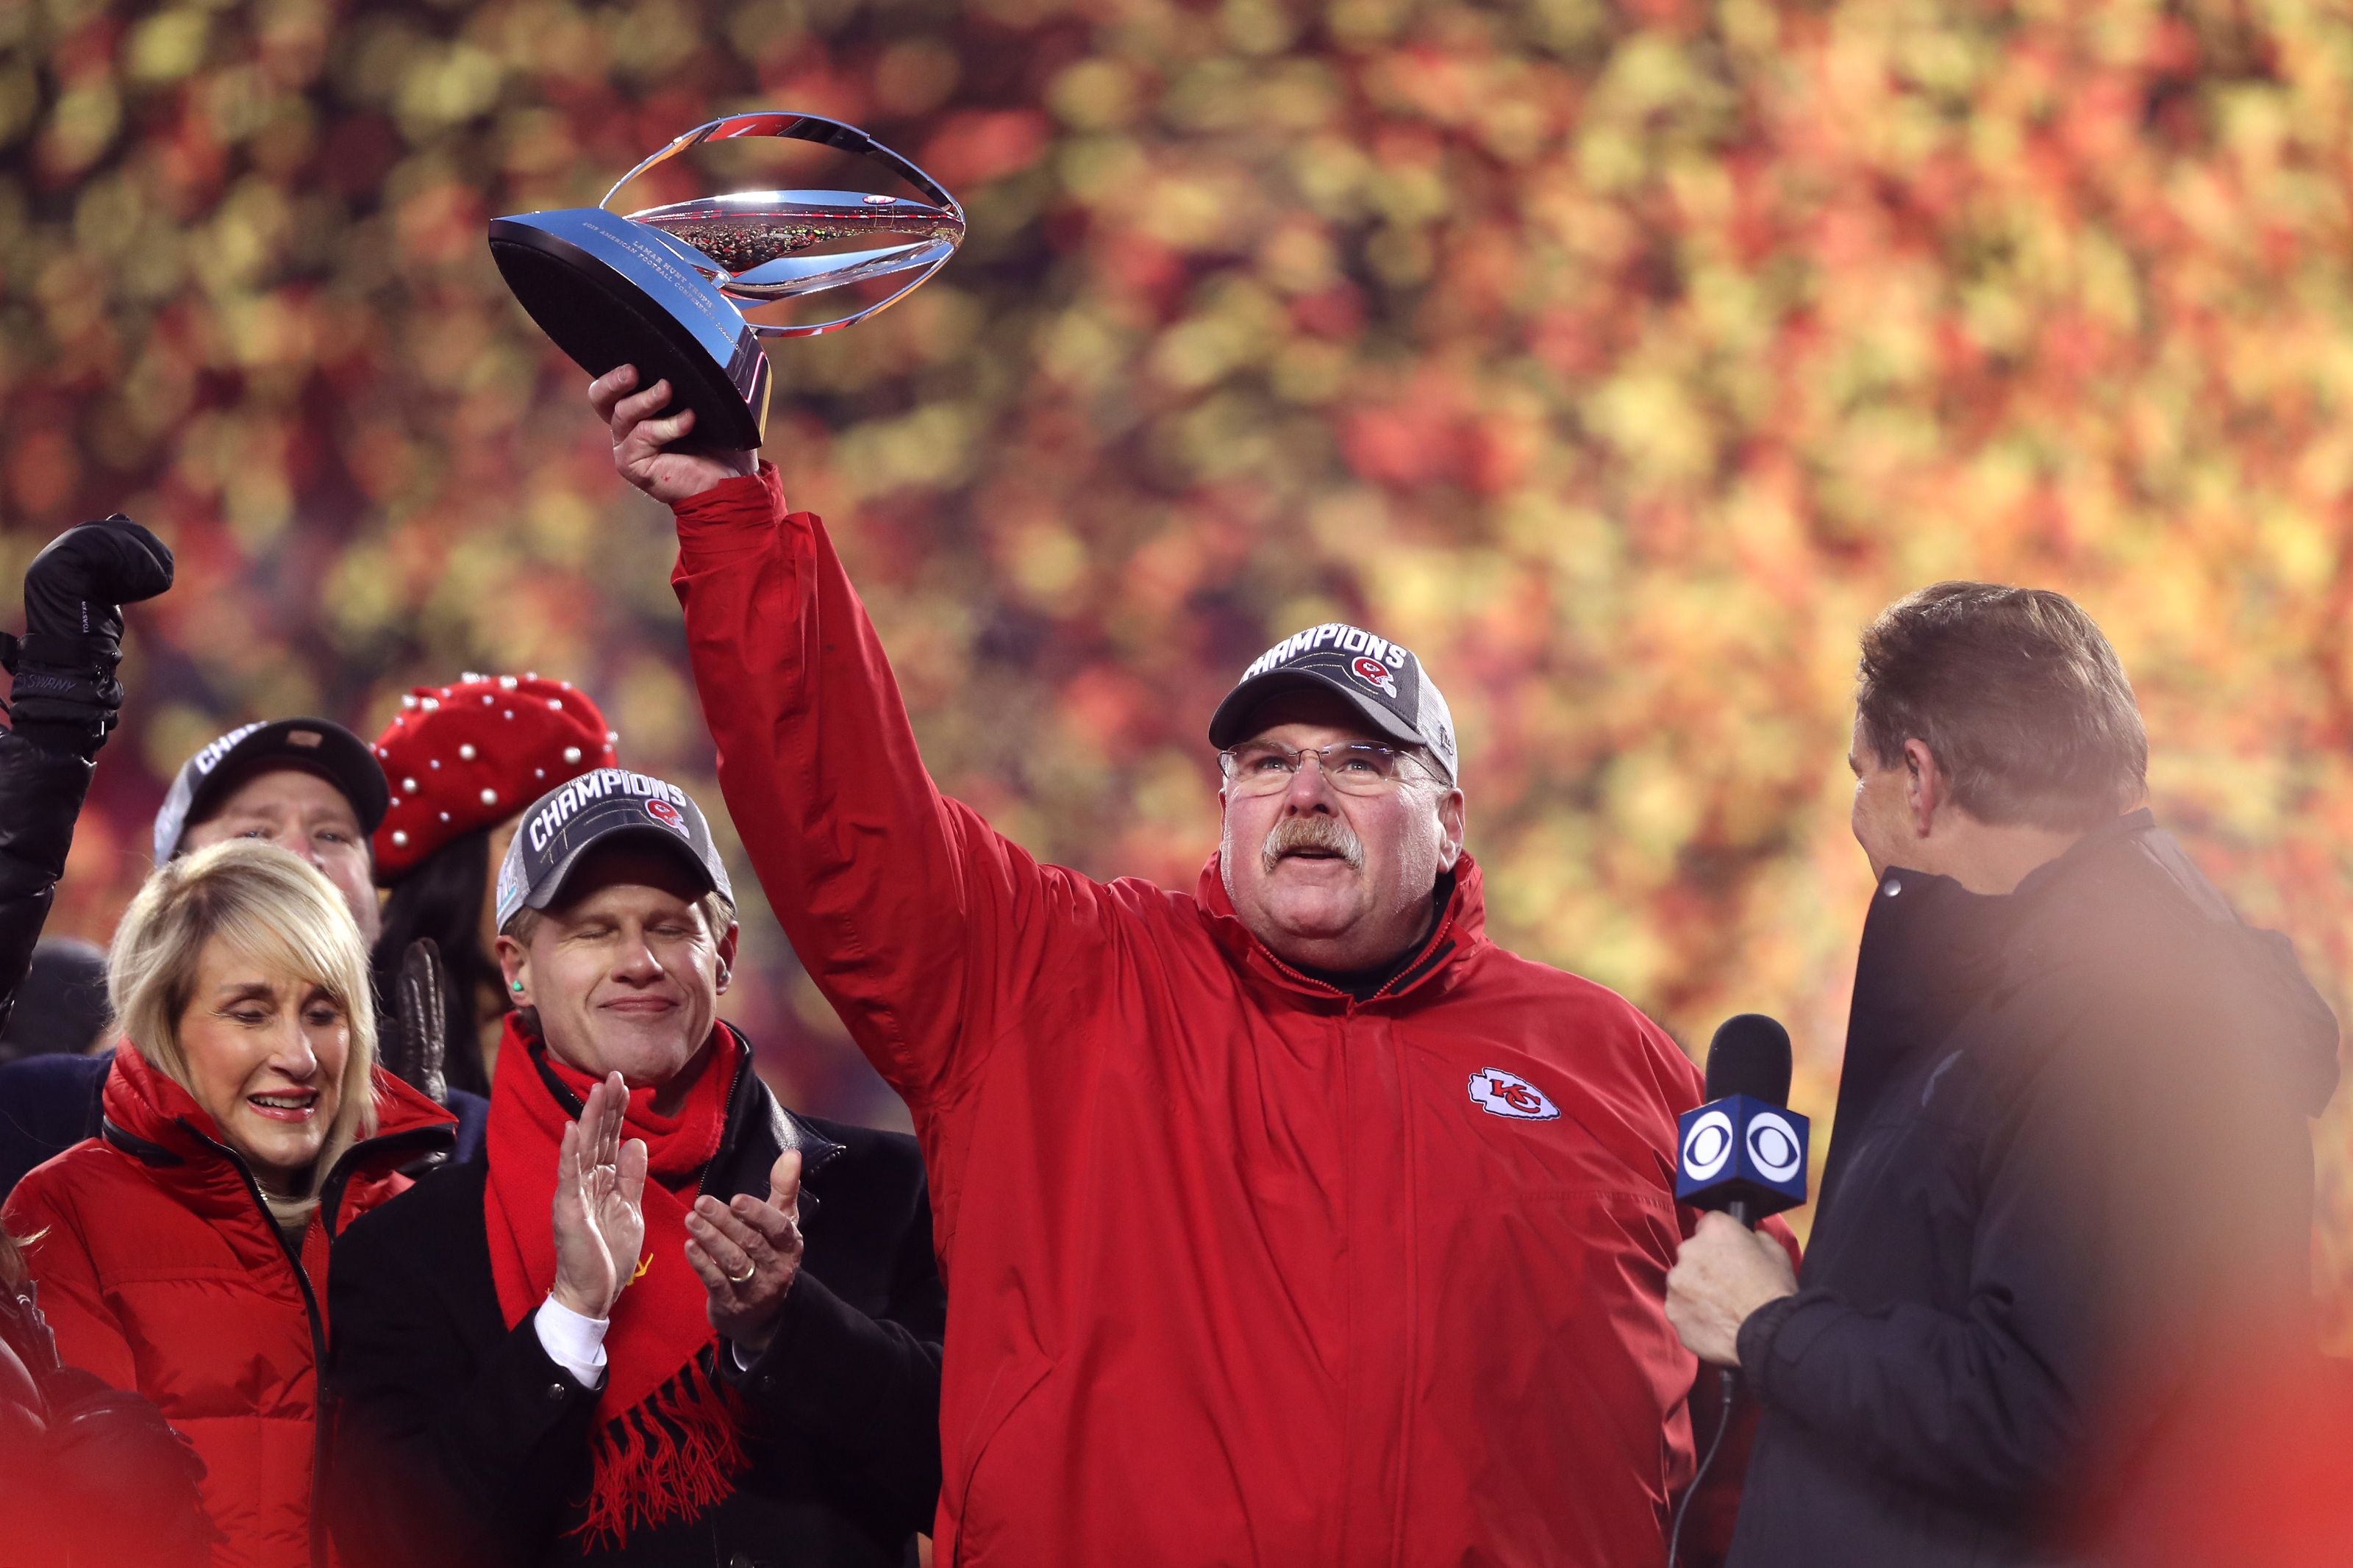 Andy Reid remains underappreciated despite the Chiefs Super Bowl appearance